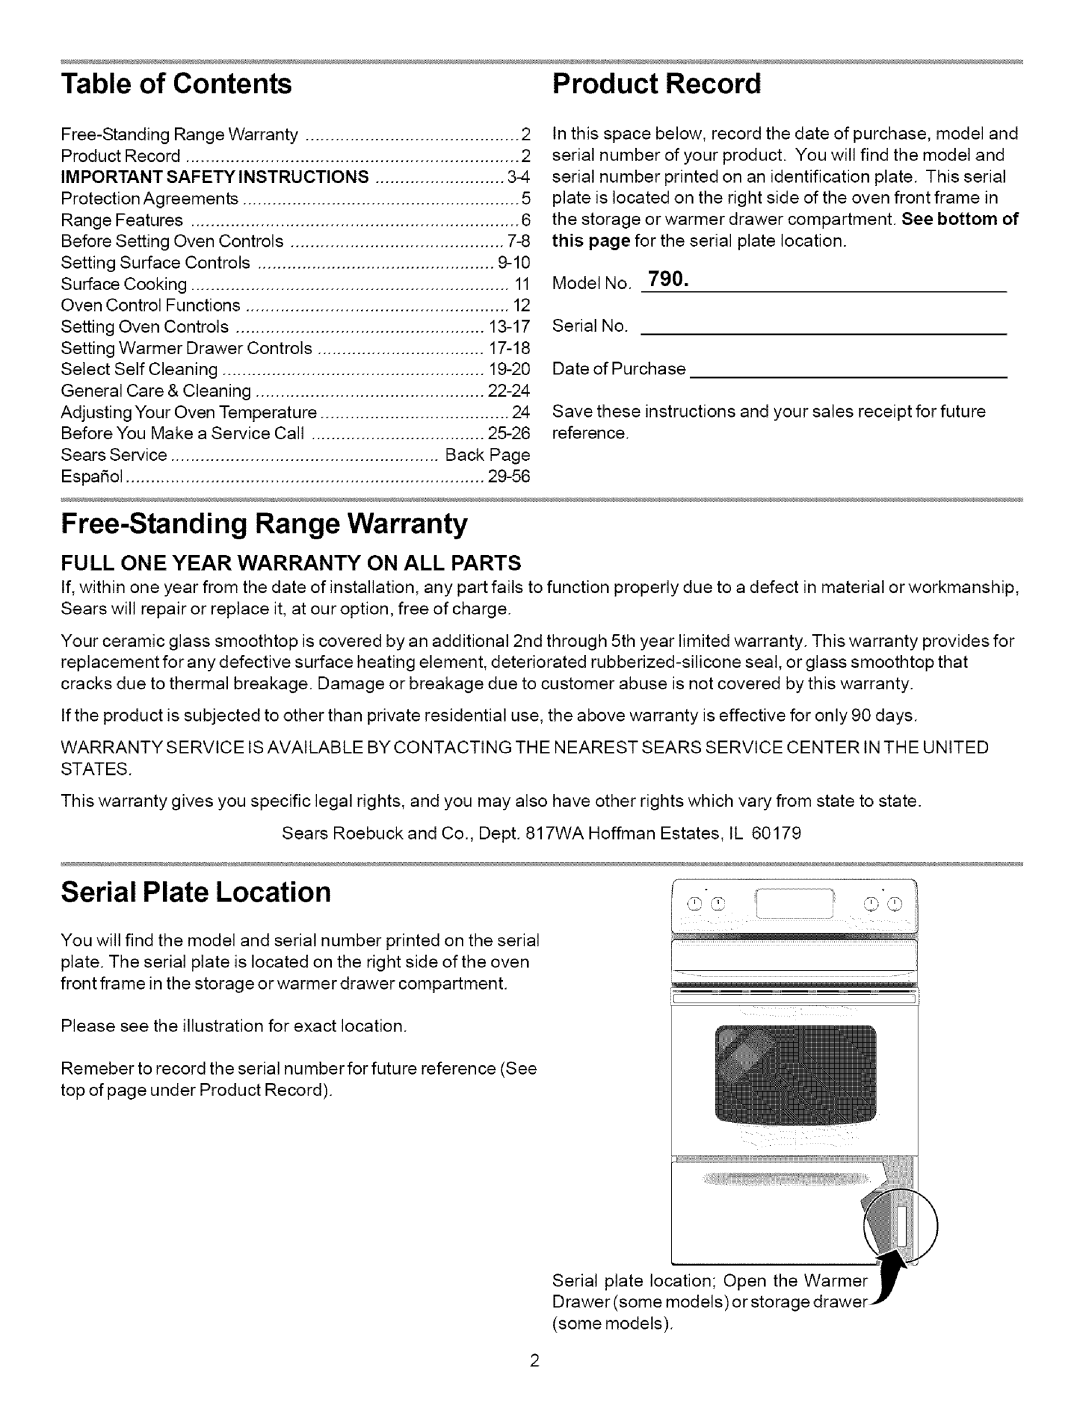 Kenmore 790.9621, 790.9631, 790.9622 Table of Contents, Product, Record, Free-StandingRange Warranty, Serial Plate Location 